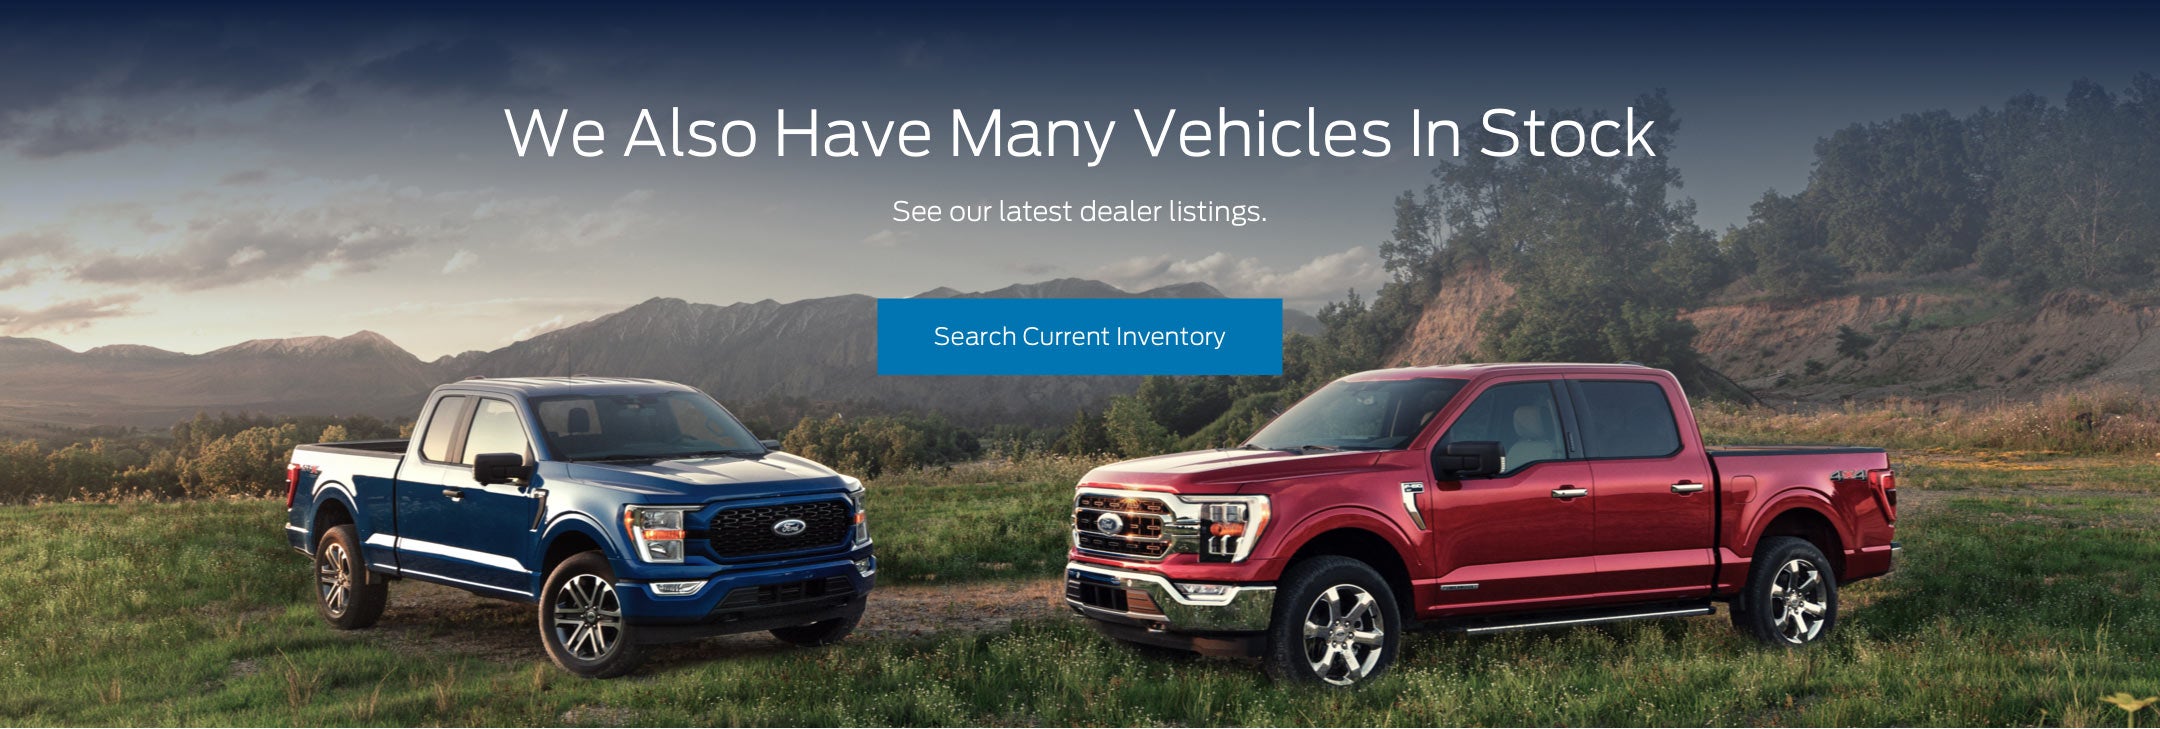 Ford vehicles in stock | Power Ford in Albuquerque NM